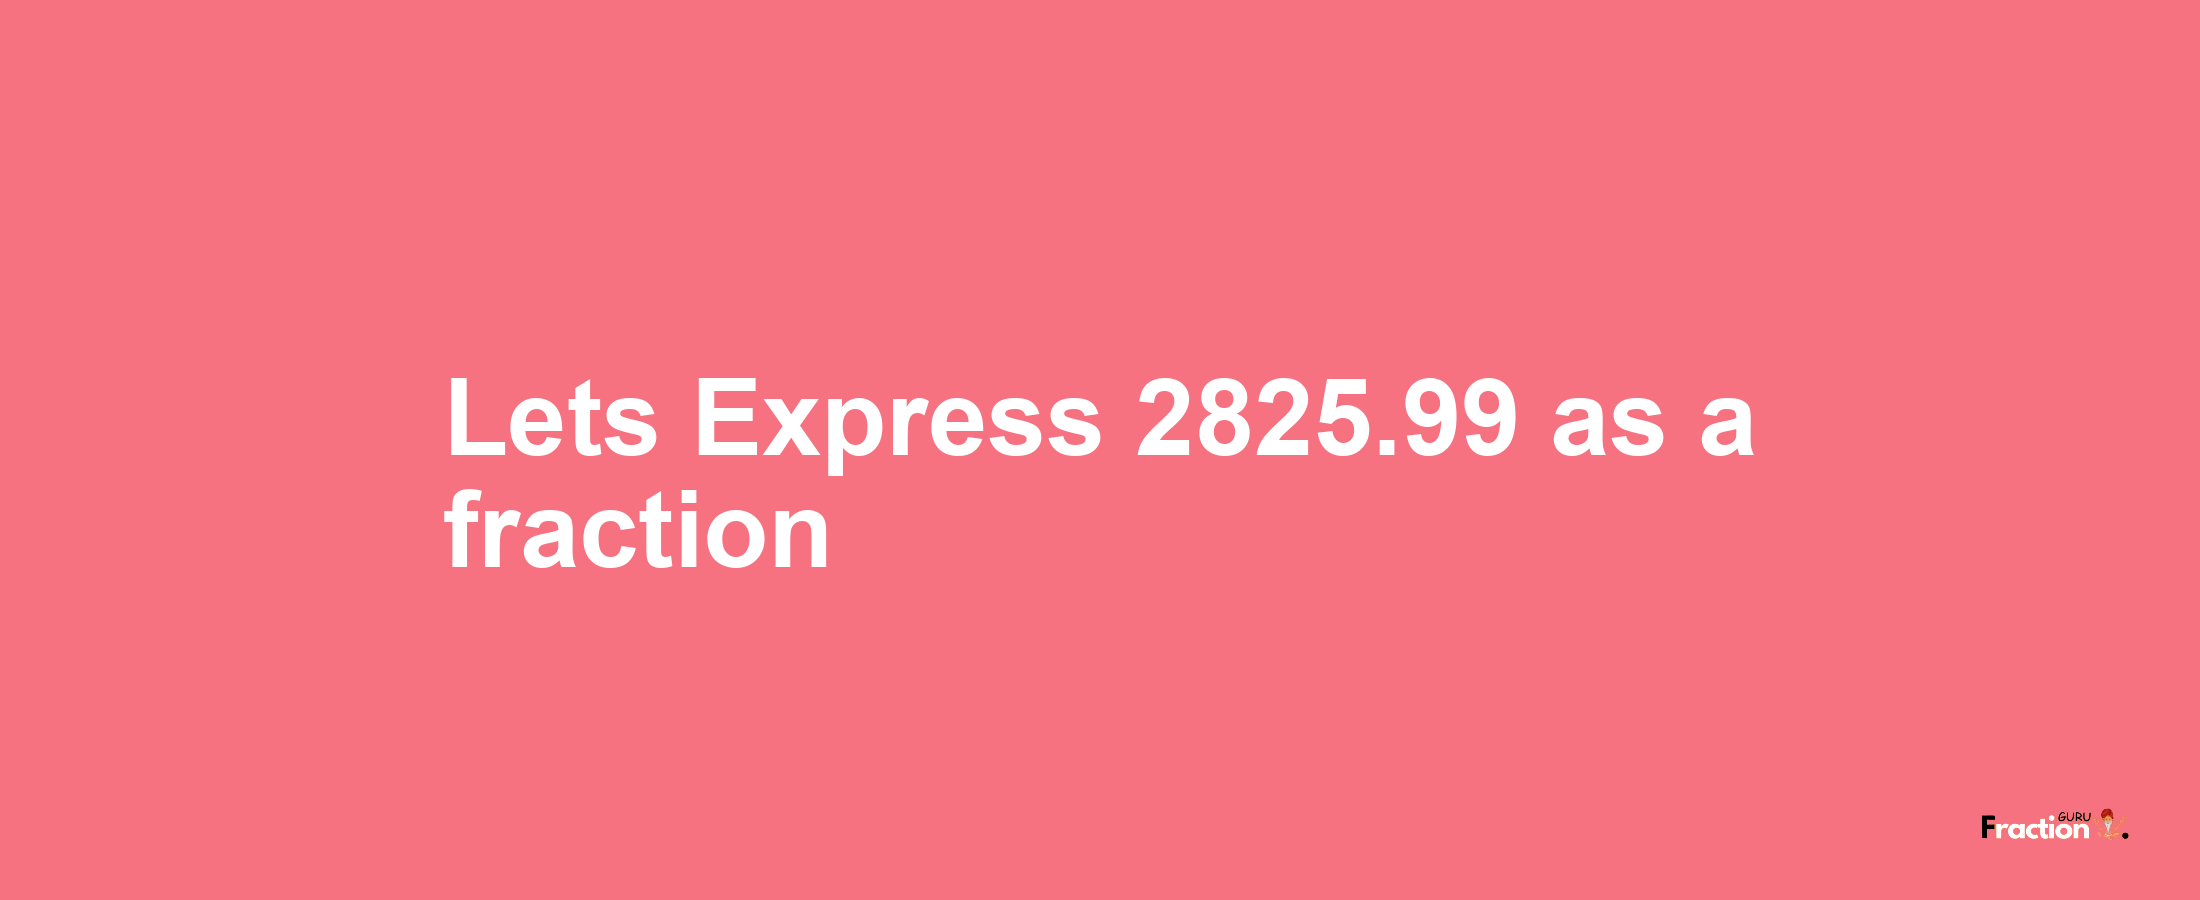 Lets Express 2825.99 as afraction